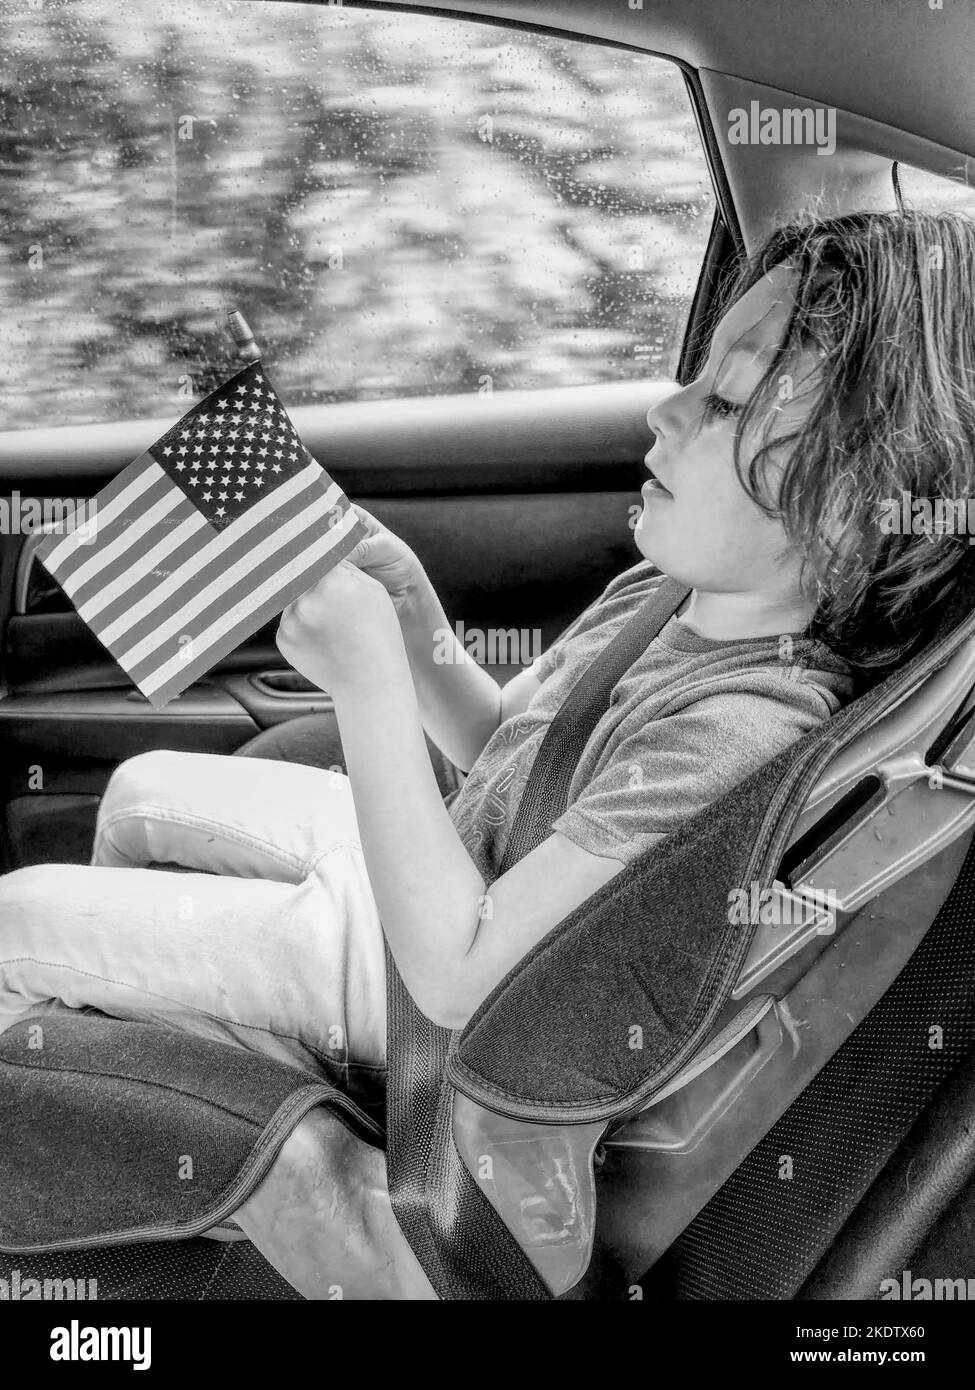 Young boy holding a small American flag while in a car Stock Photo